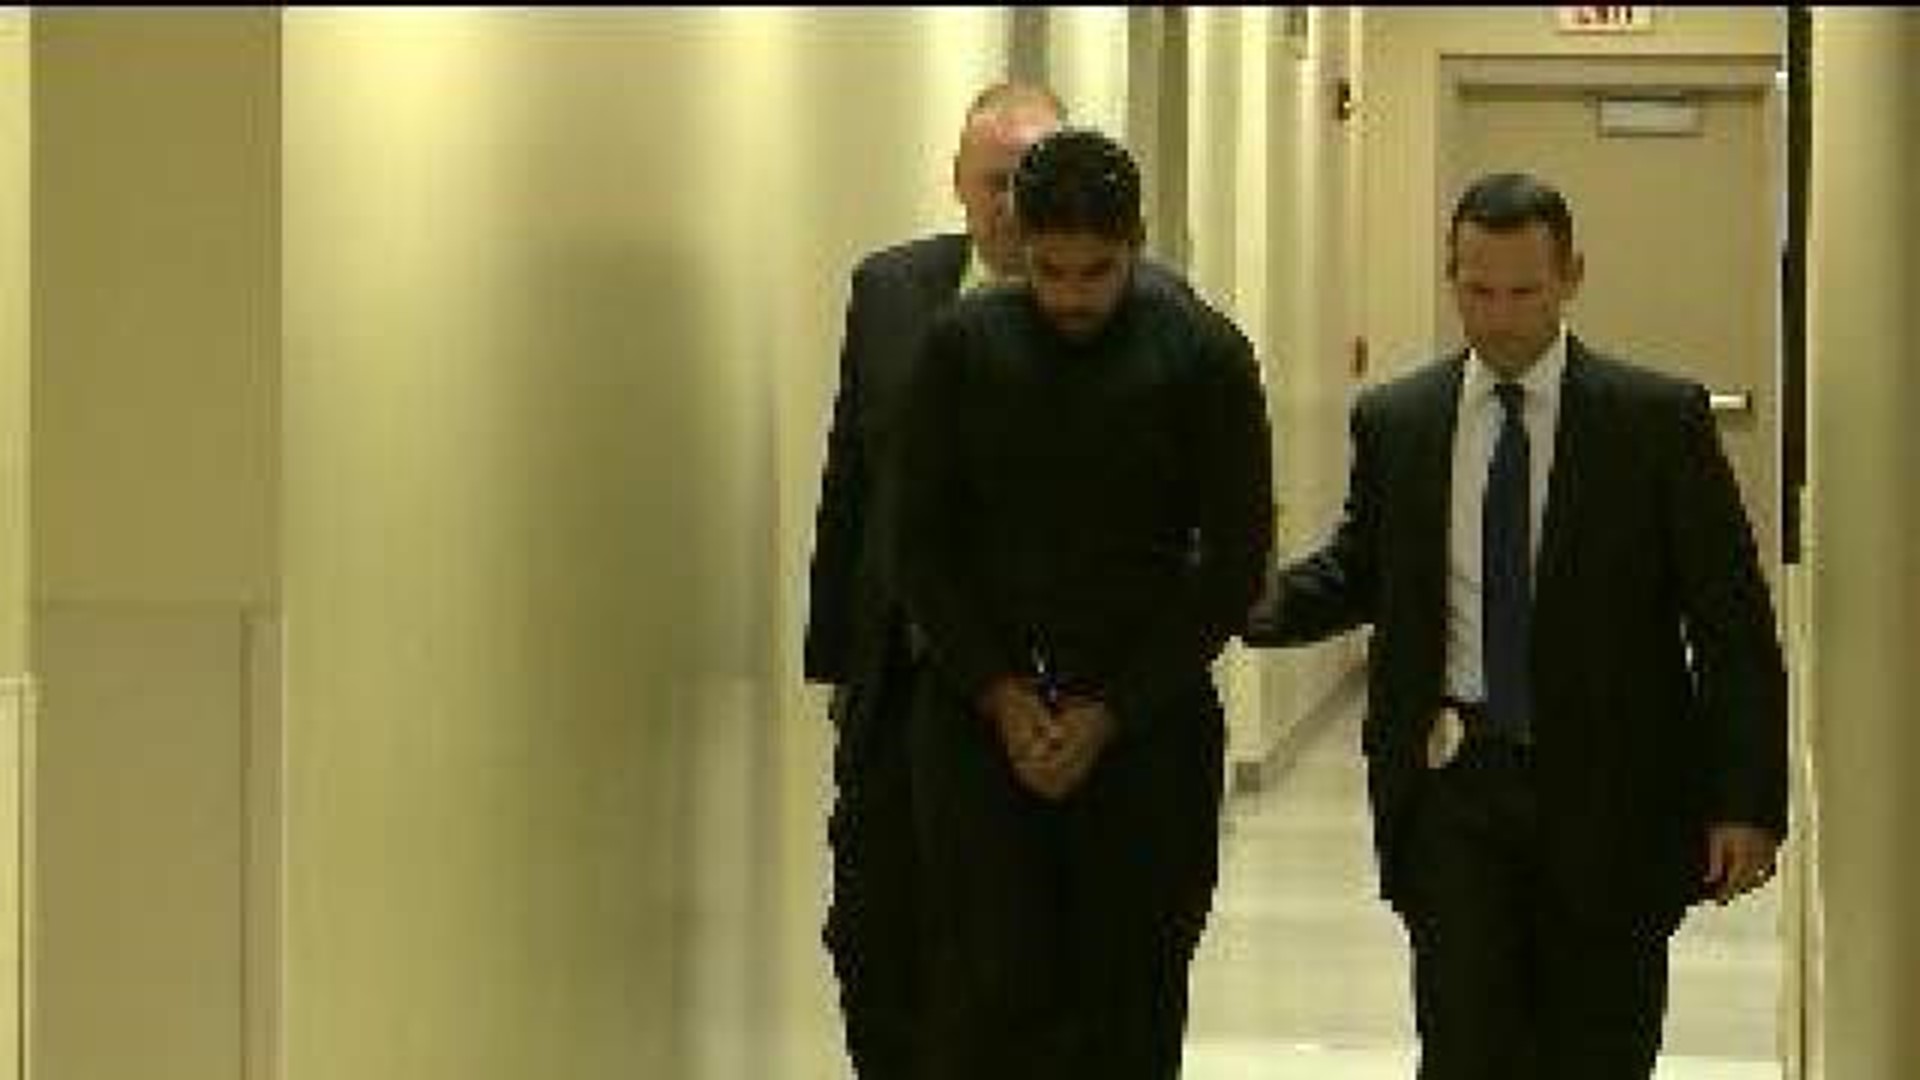 Pal Trial: Text Messages Examined in Court